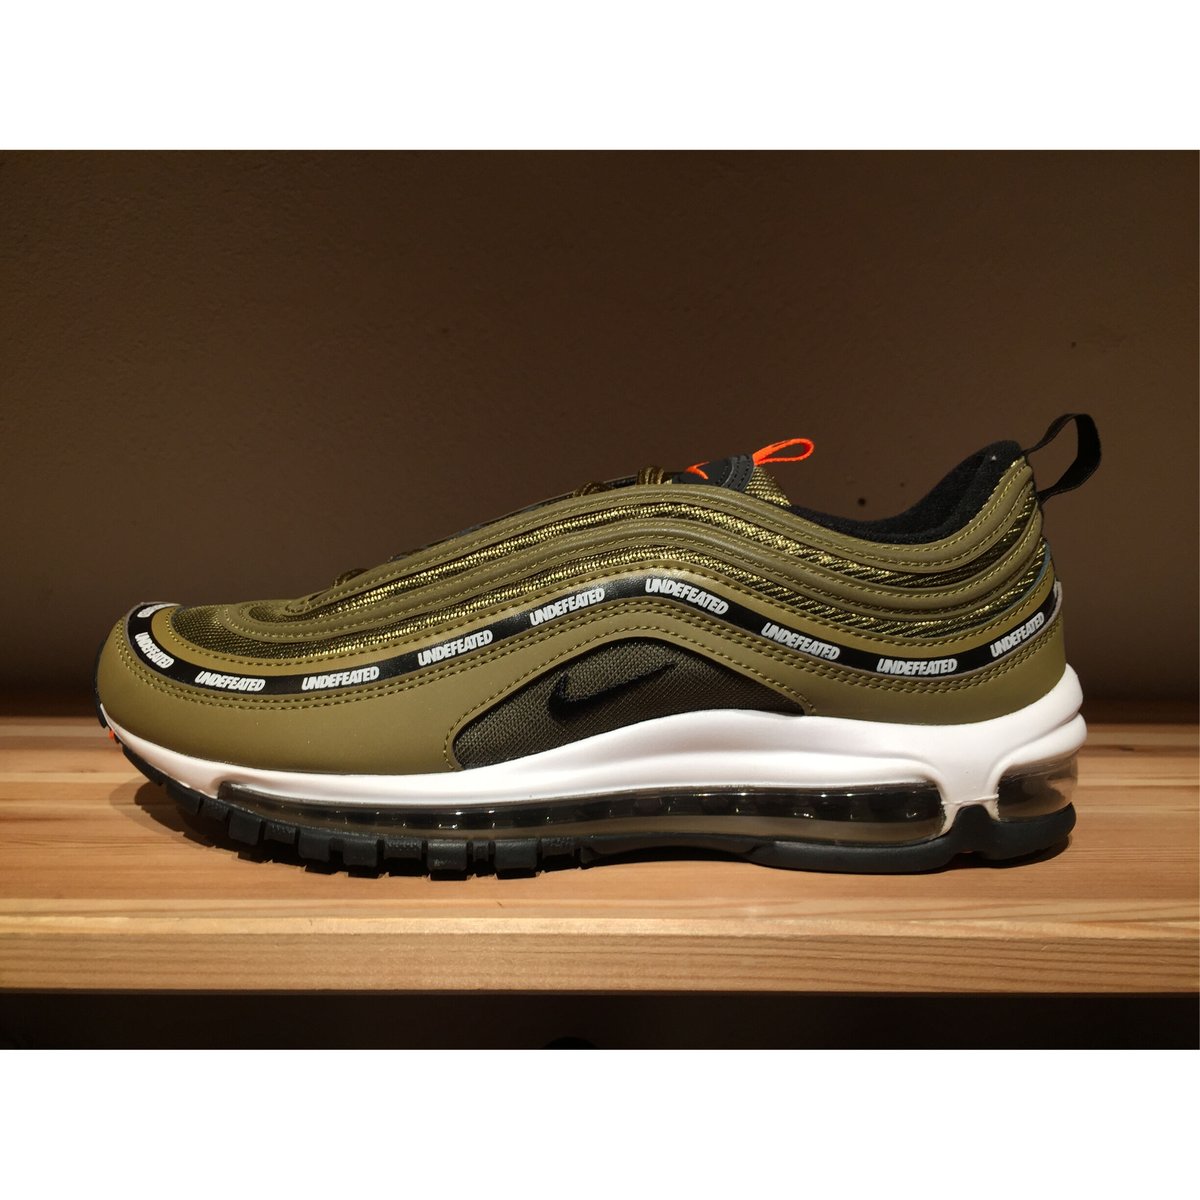 UNDEFEATED x NIKE AIR MAX 97 26.5cm